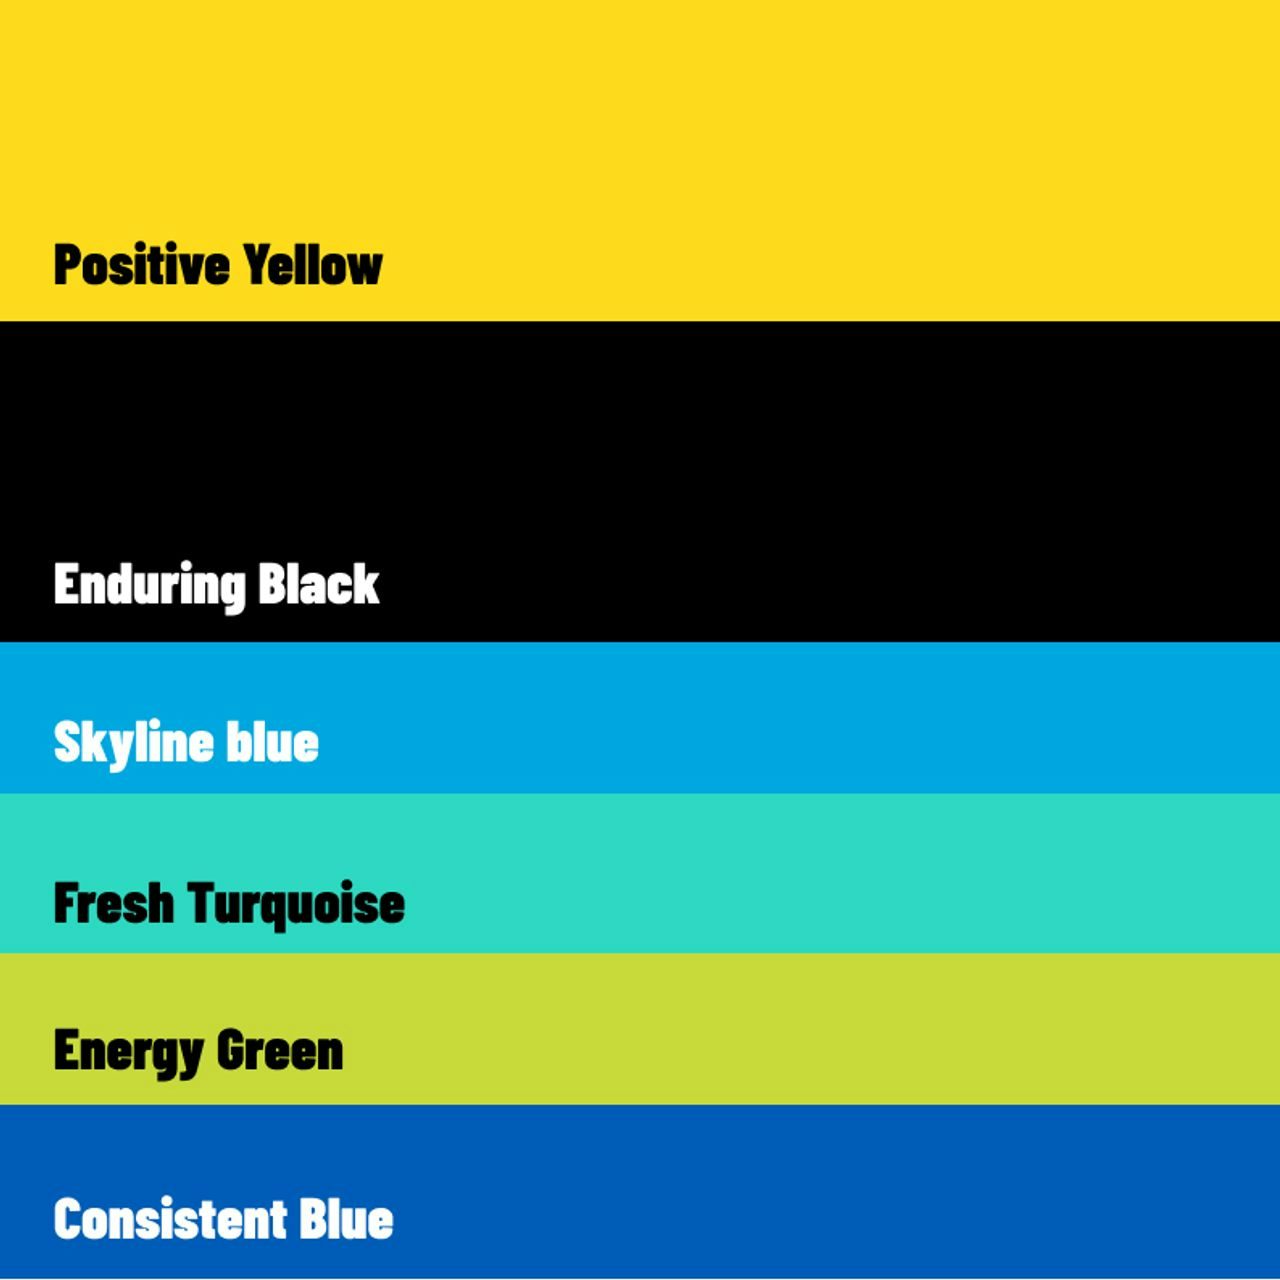 Colour palette displaying horizontal stripes with names: Positive Yellow, Enduring Black, Skyline Blue, Fresh Turquoise, Energy Green and Consistent Blue.